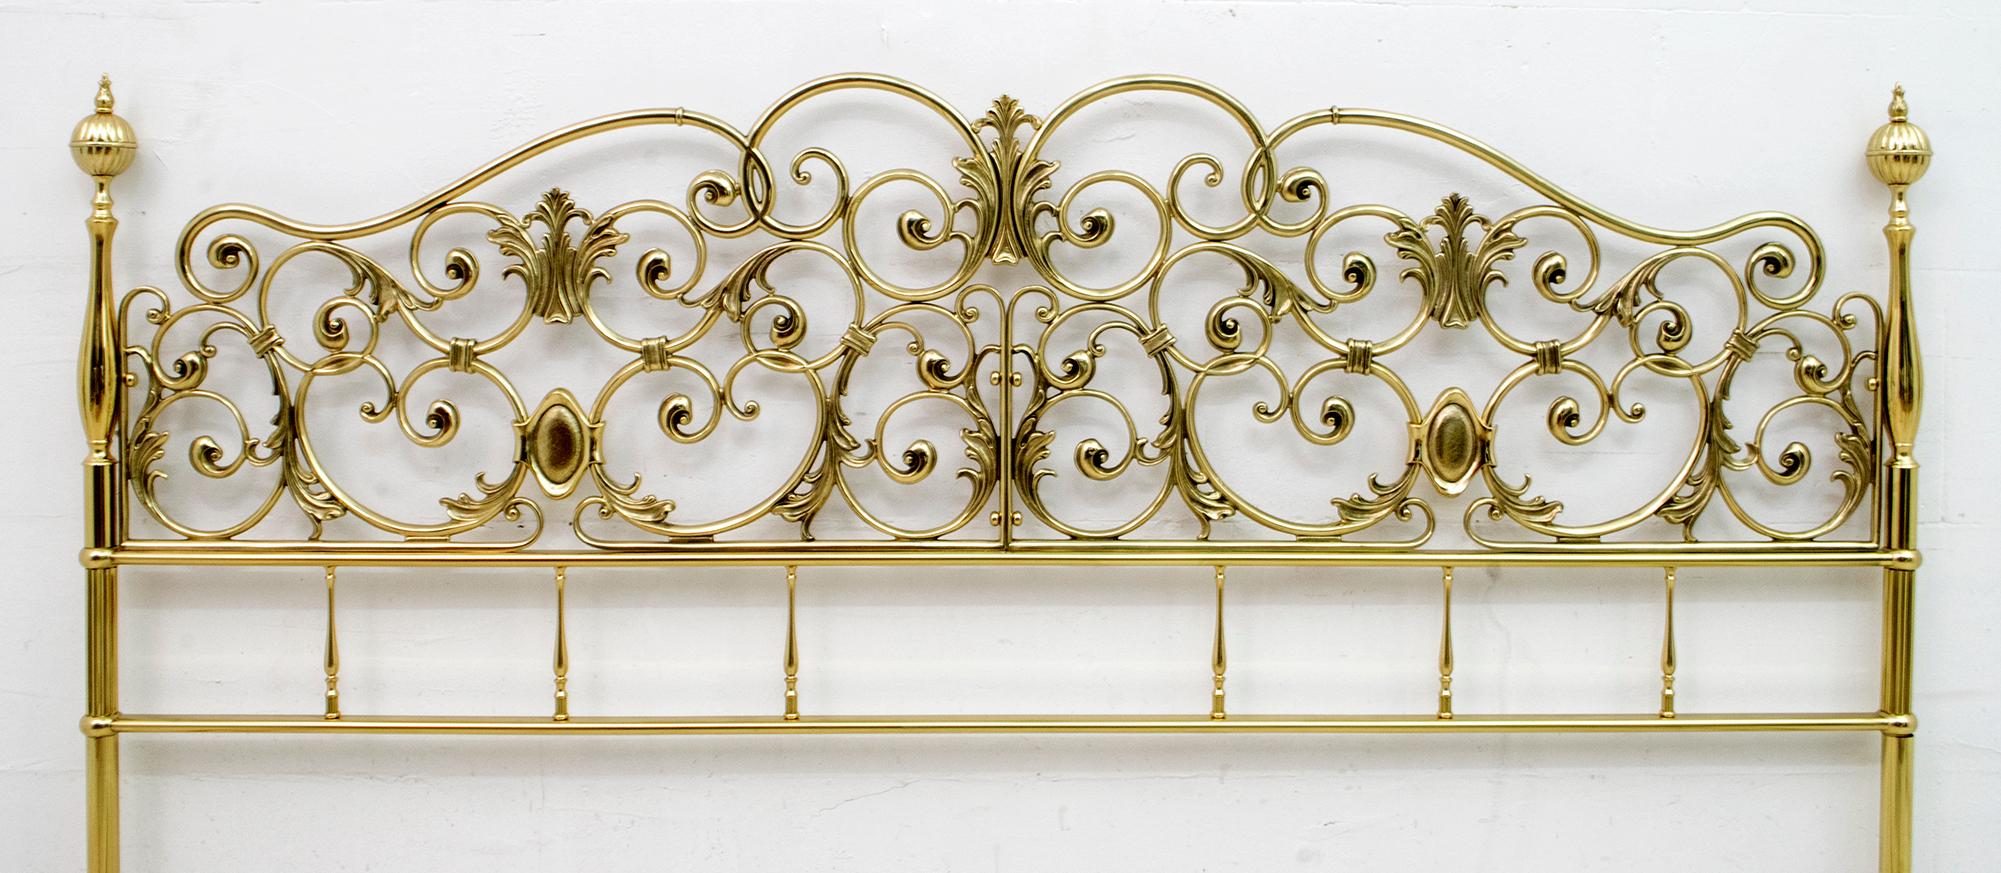 Italian double bed in neoclassical style, 1960s production in solid brass.

Mattress size: 160 x 190 cm